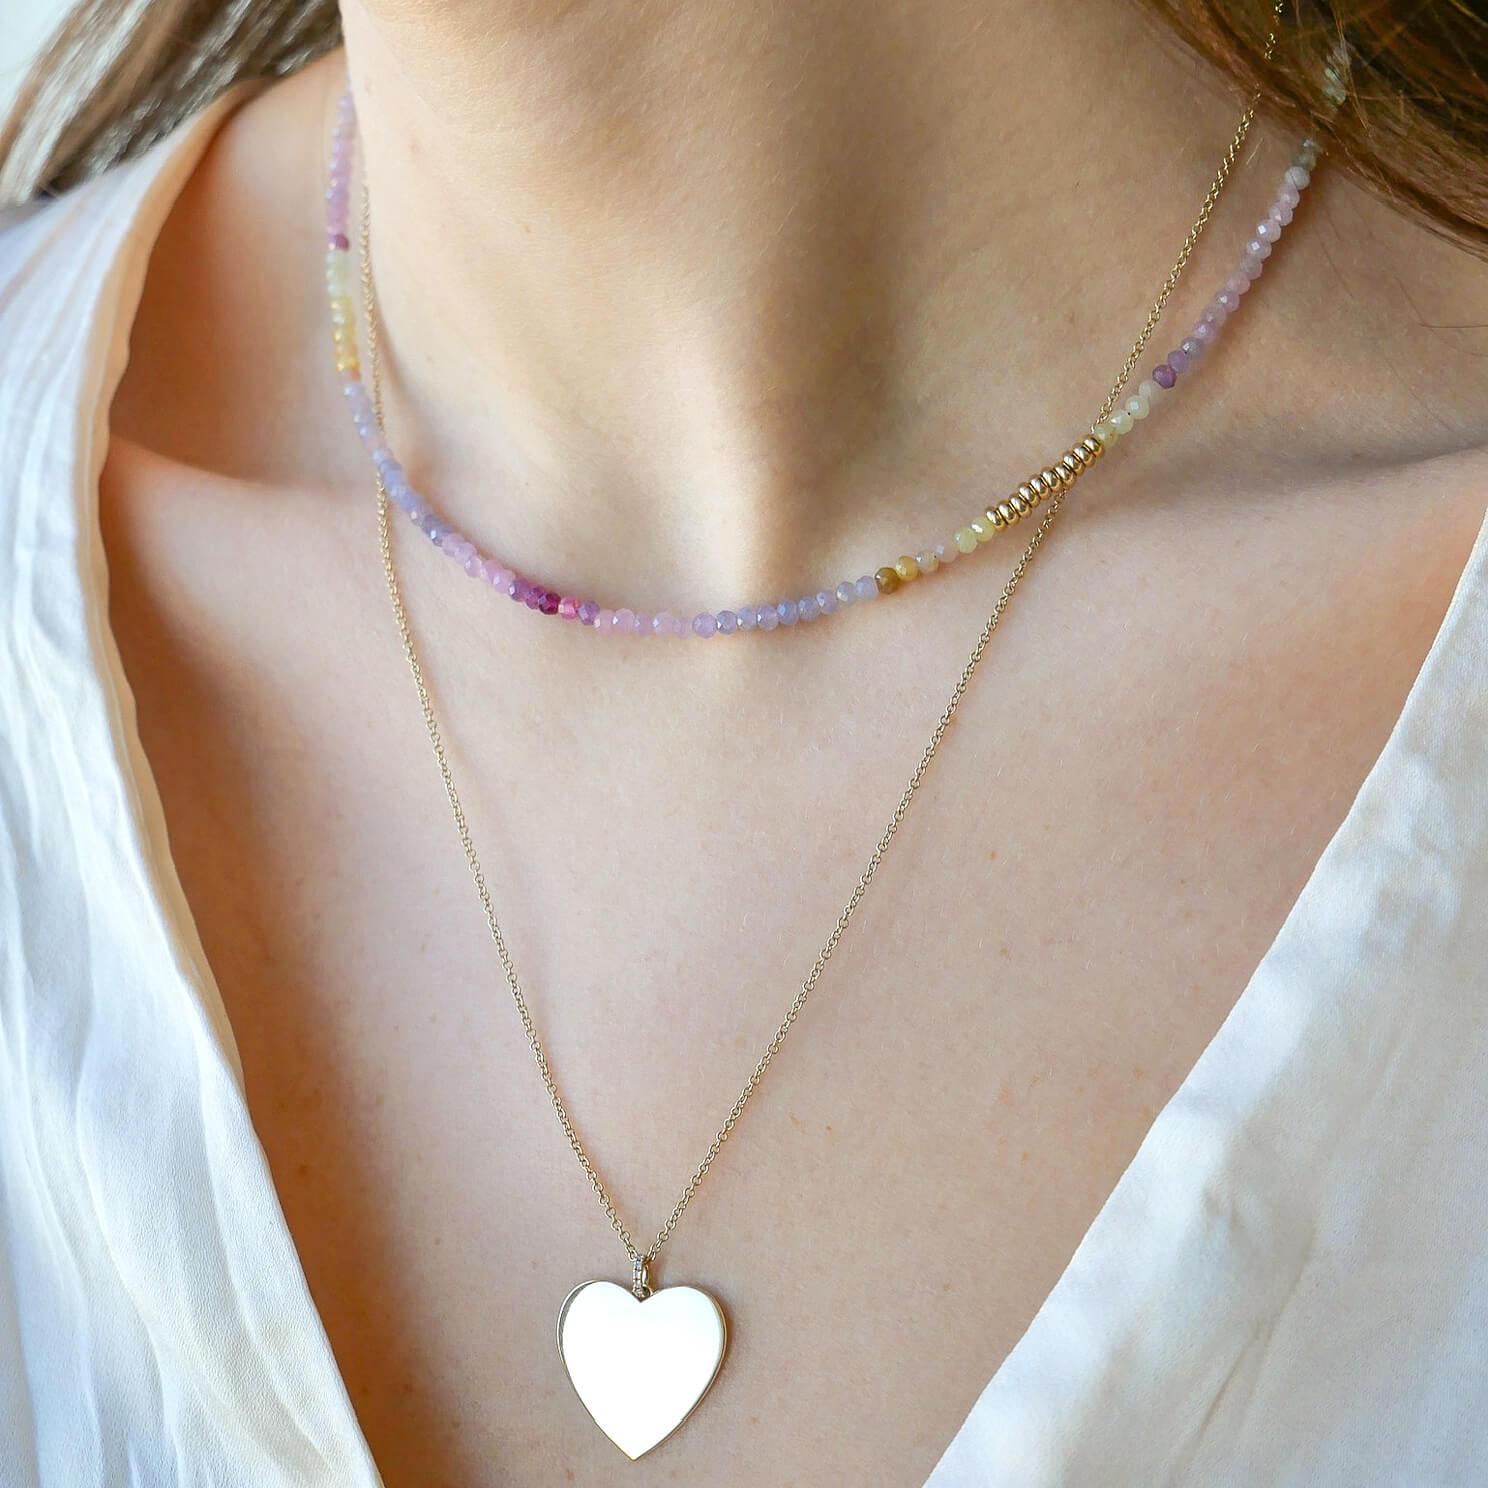 Ombré Sapphire Birthstone Bead Necklace in 14k yellow gold styled on neck of model with gold heart necklace